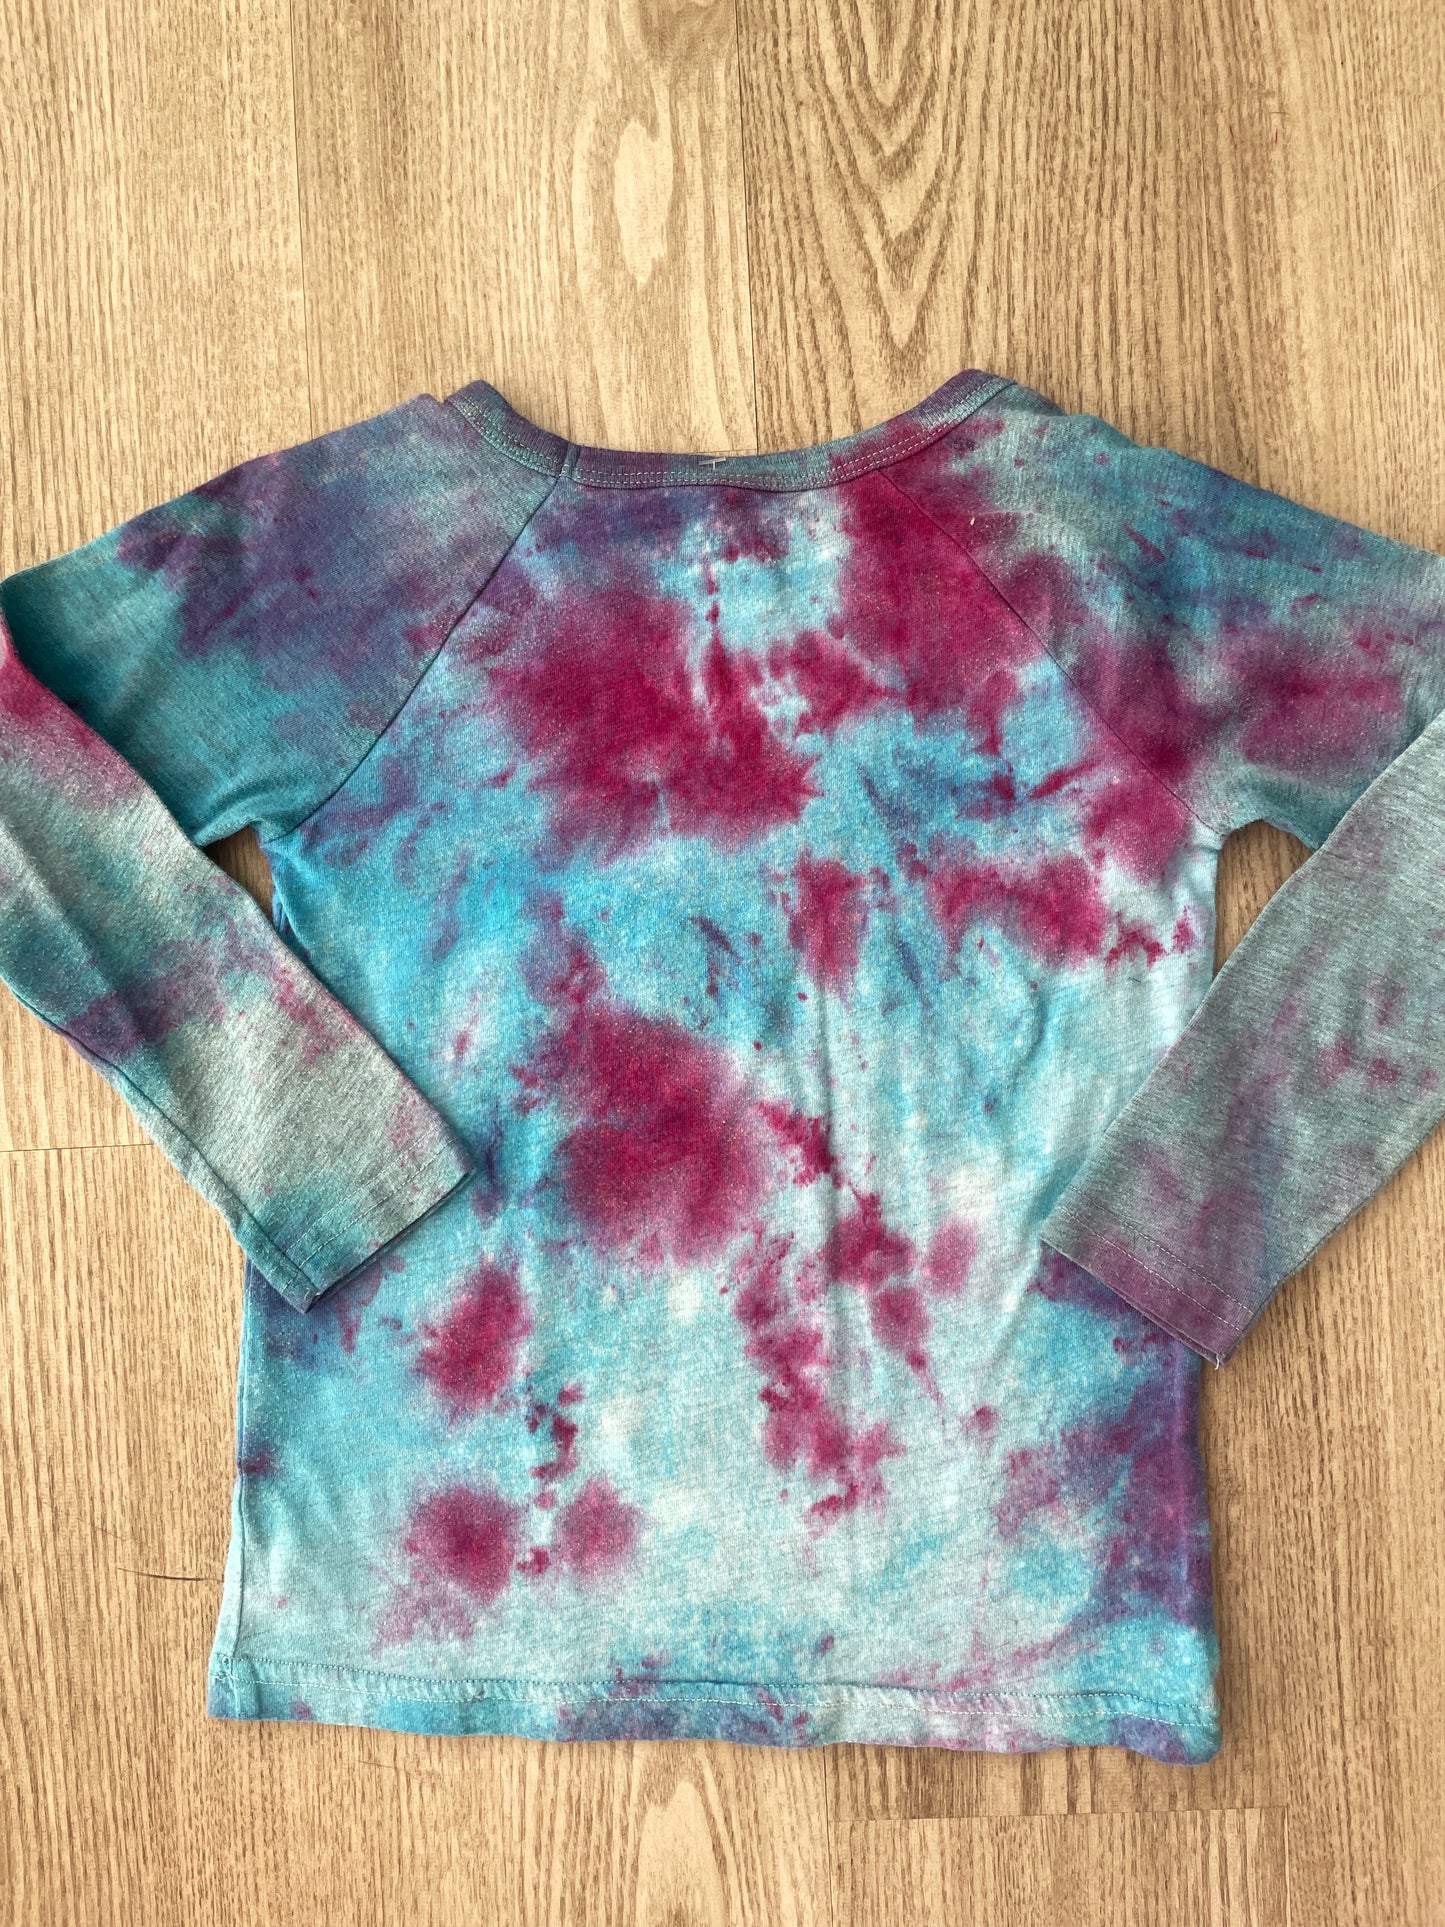 Youth Size 5 Scoobie Doo ZOINKS Handmade Galaxy Tie Dye Short Long Sleeve T-Shirt | One-Of-a-Kind Upcycled Blue and Pink Ice Dye Top